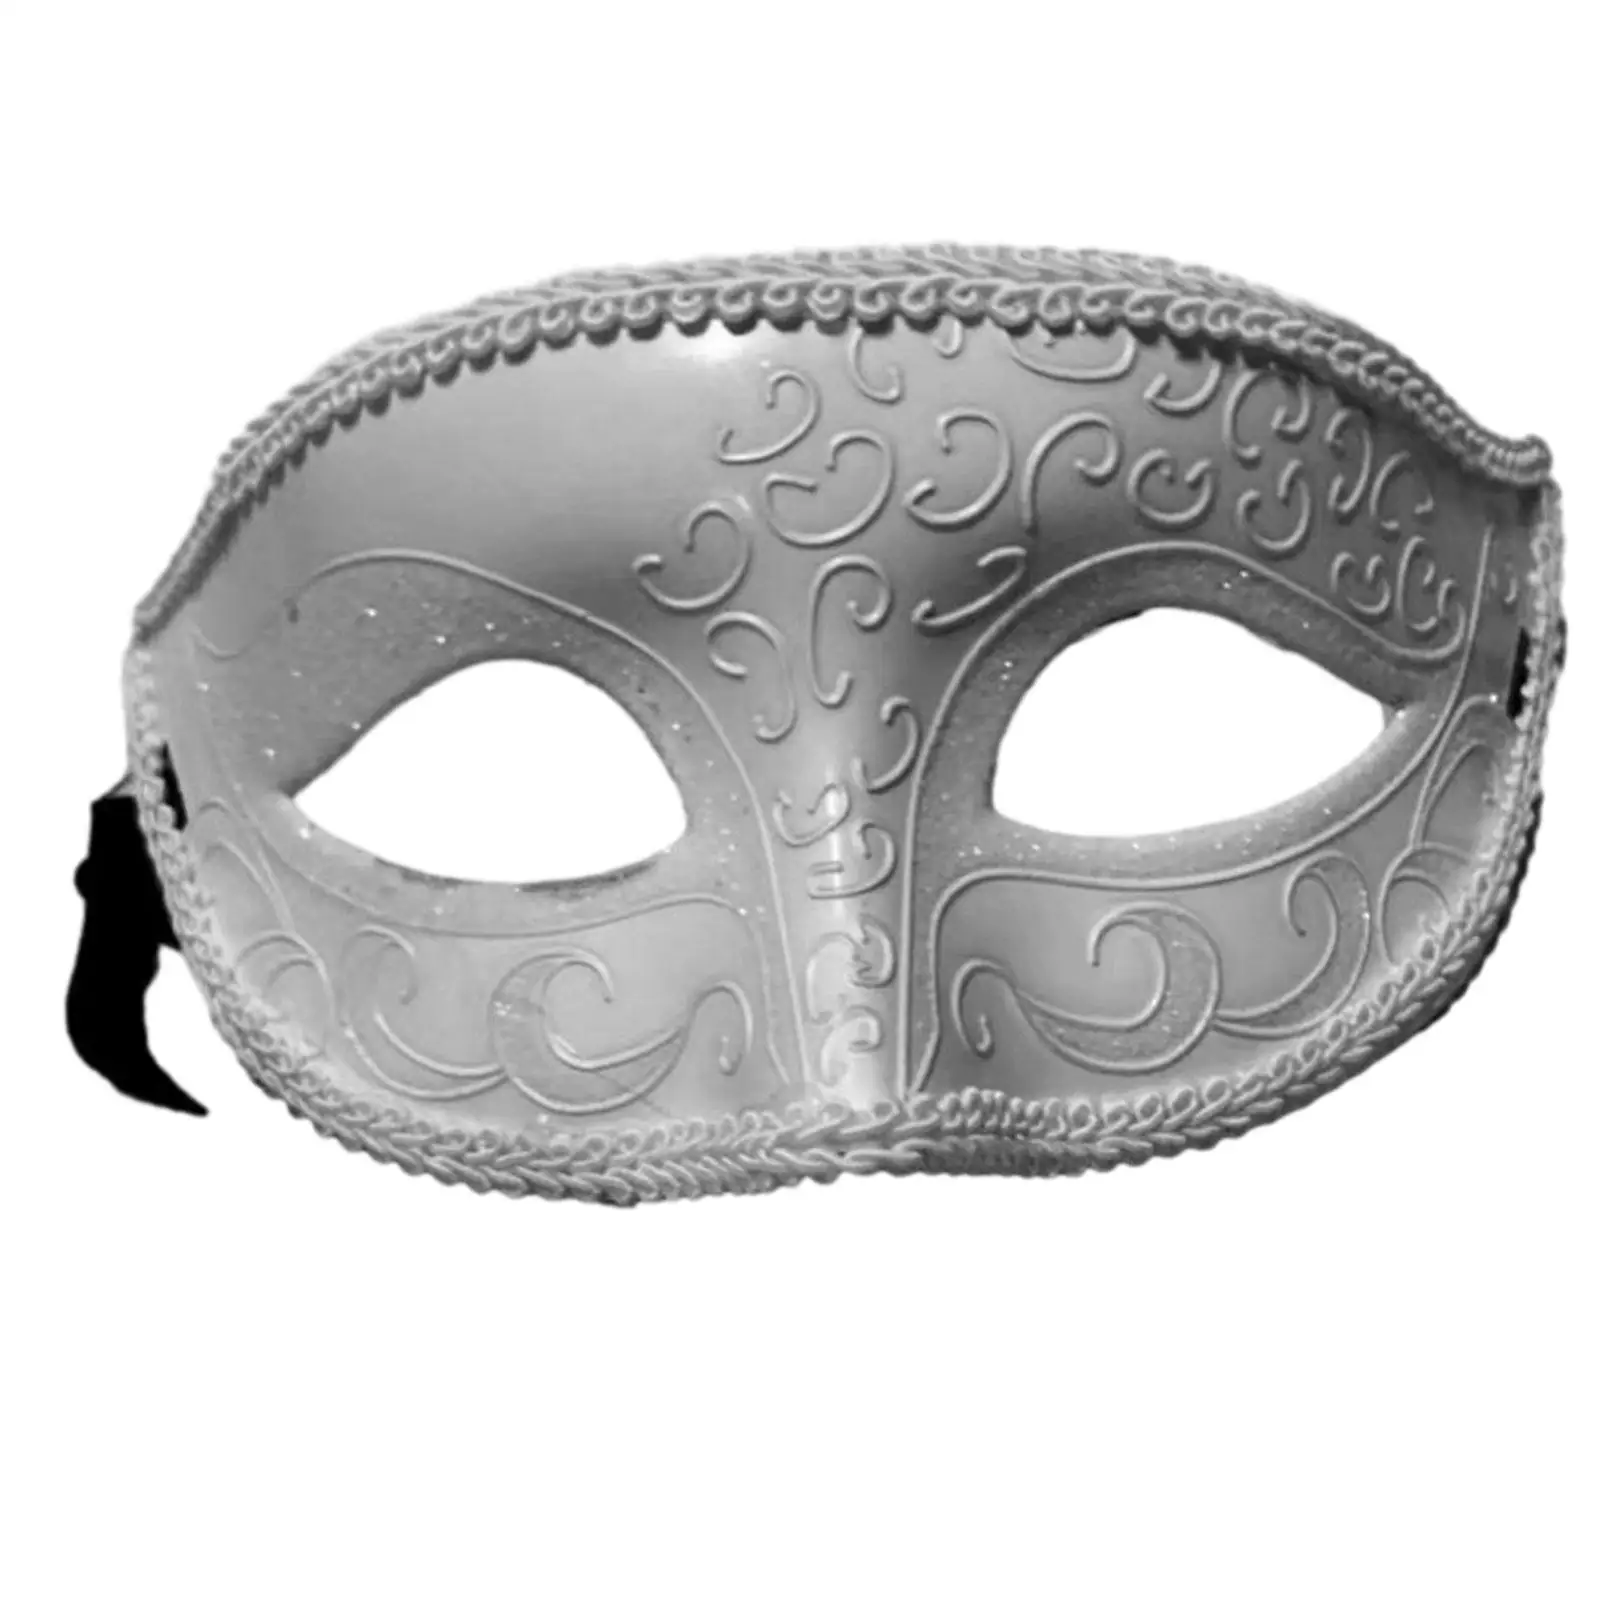 Masquerade Mask Prince Masks with Elastic Strap Eye Mask Cosplay Half Face Mask for Halloween Dancing Festival Dress up Evening